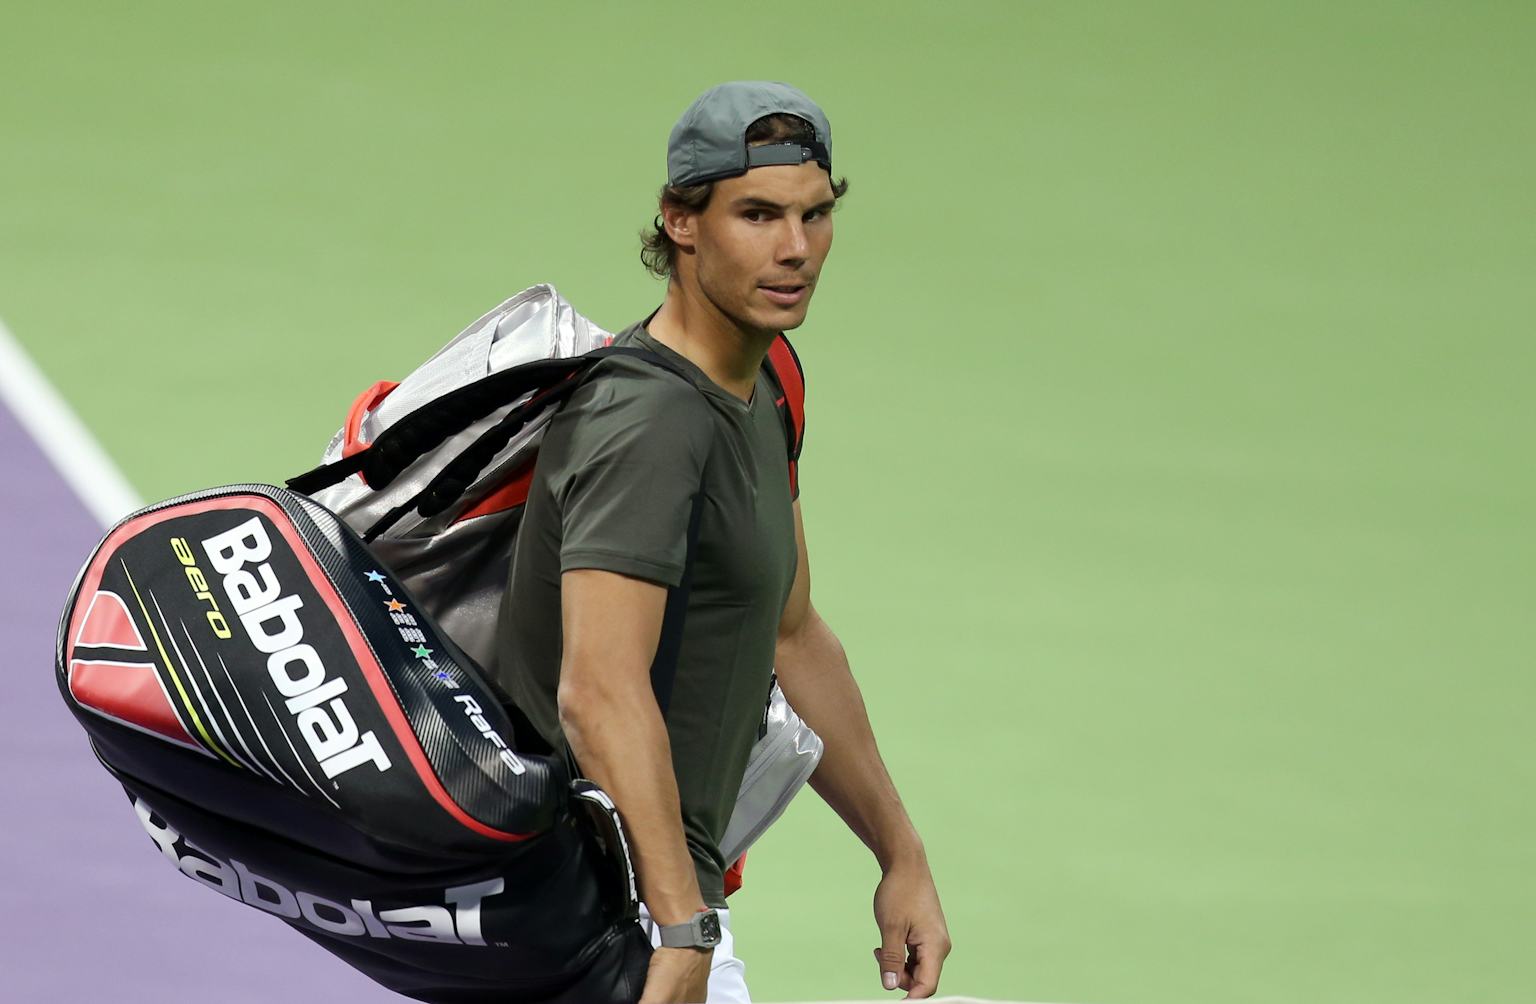 Rafael Nadal Injury Update: What Is a Strained Iliopsoas Muscle?